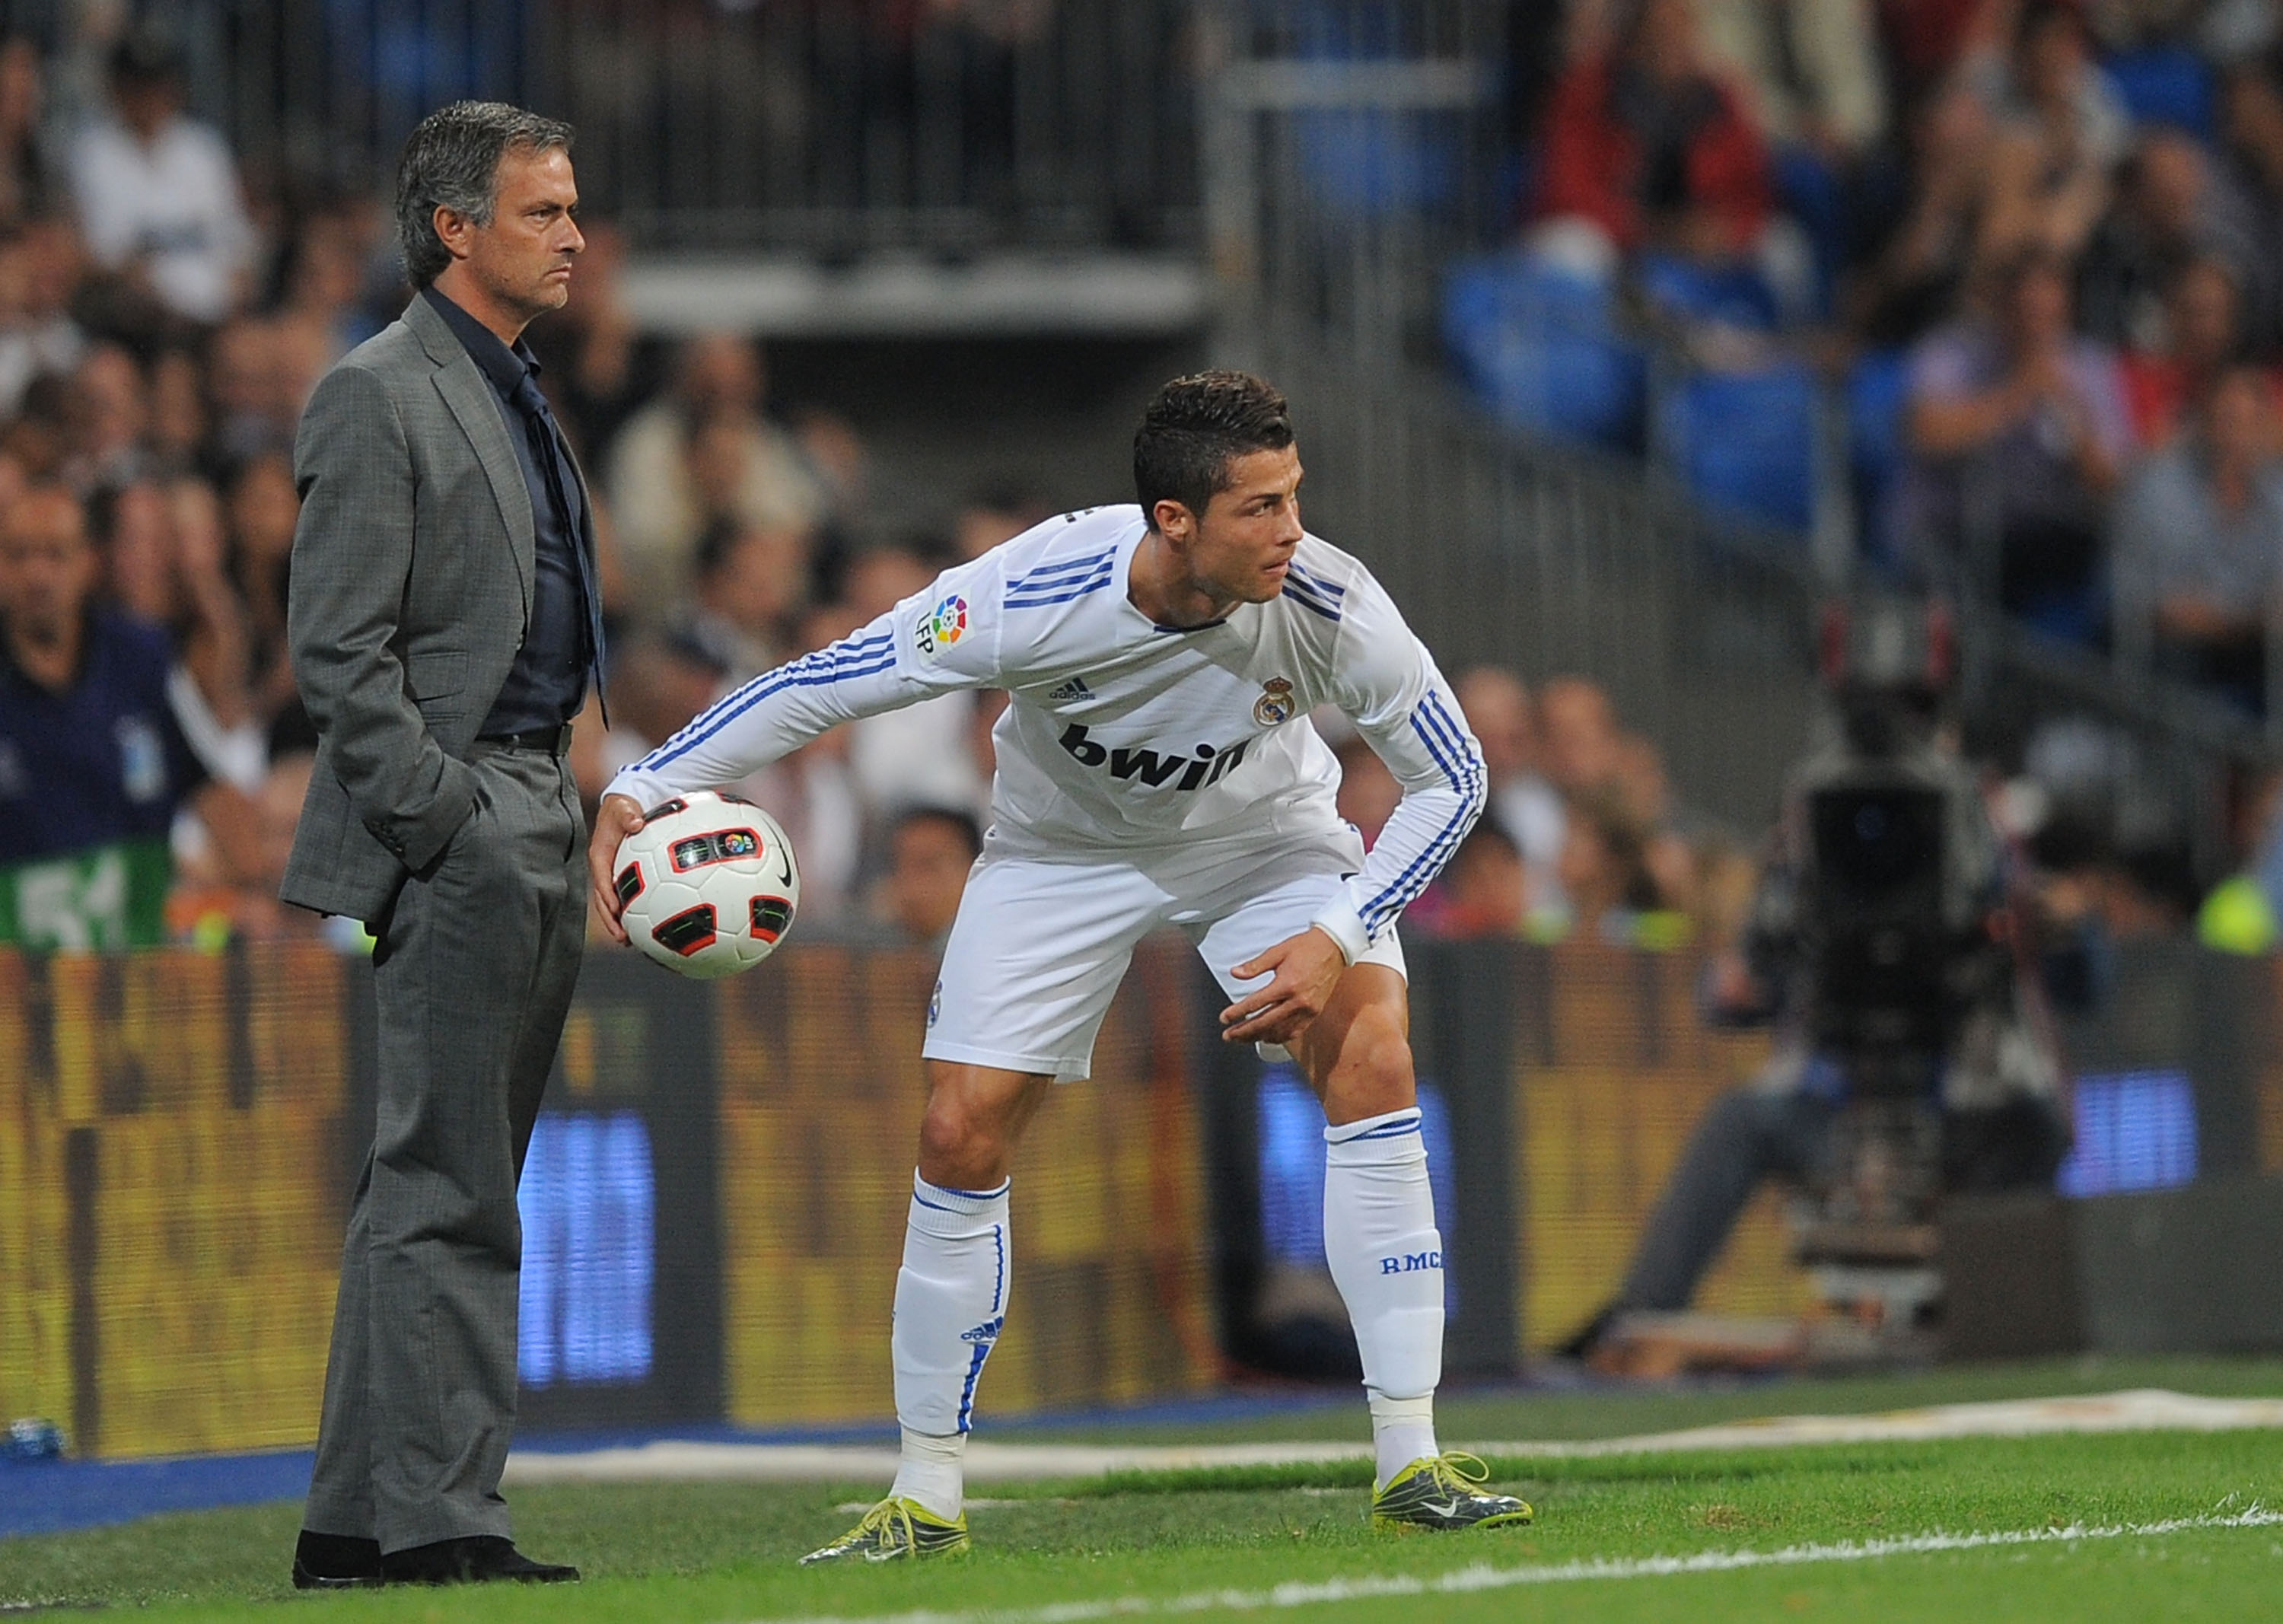 MADRID, SPAIN - SEPTEMBER 21:  Cristiano Ronaldo of Ral Madrid throws the ball back in play beside Real manager Jose Mourinho during the La Liga match between Real Madrid and Espanyol at Estadio Santiago Bernabeu on September 21, 2010 in Madrid, Spain.  (